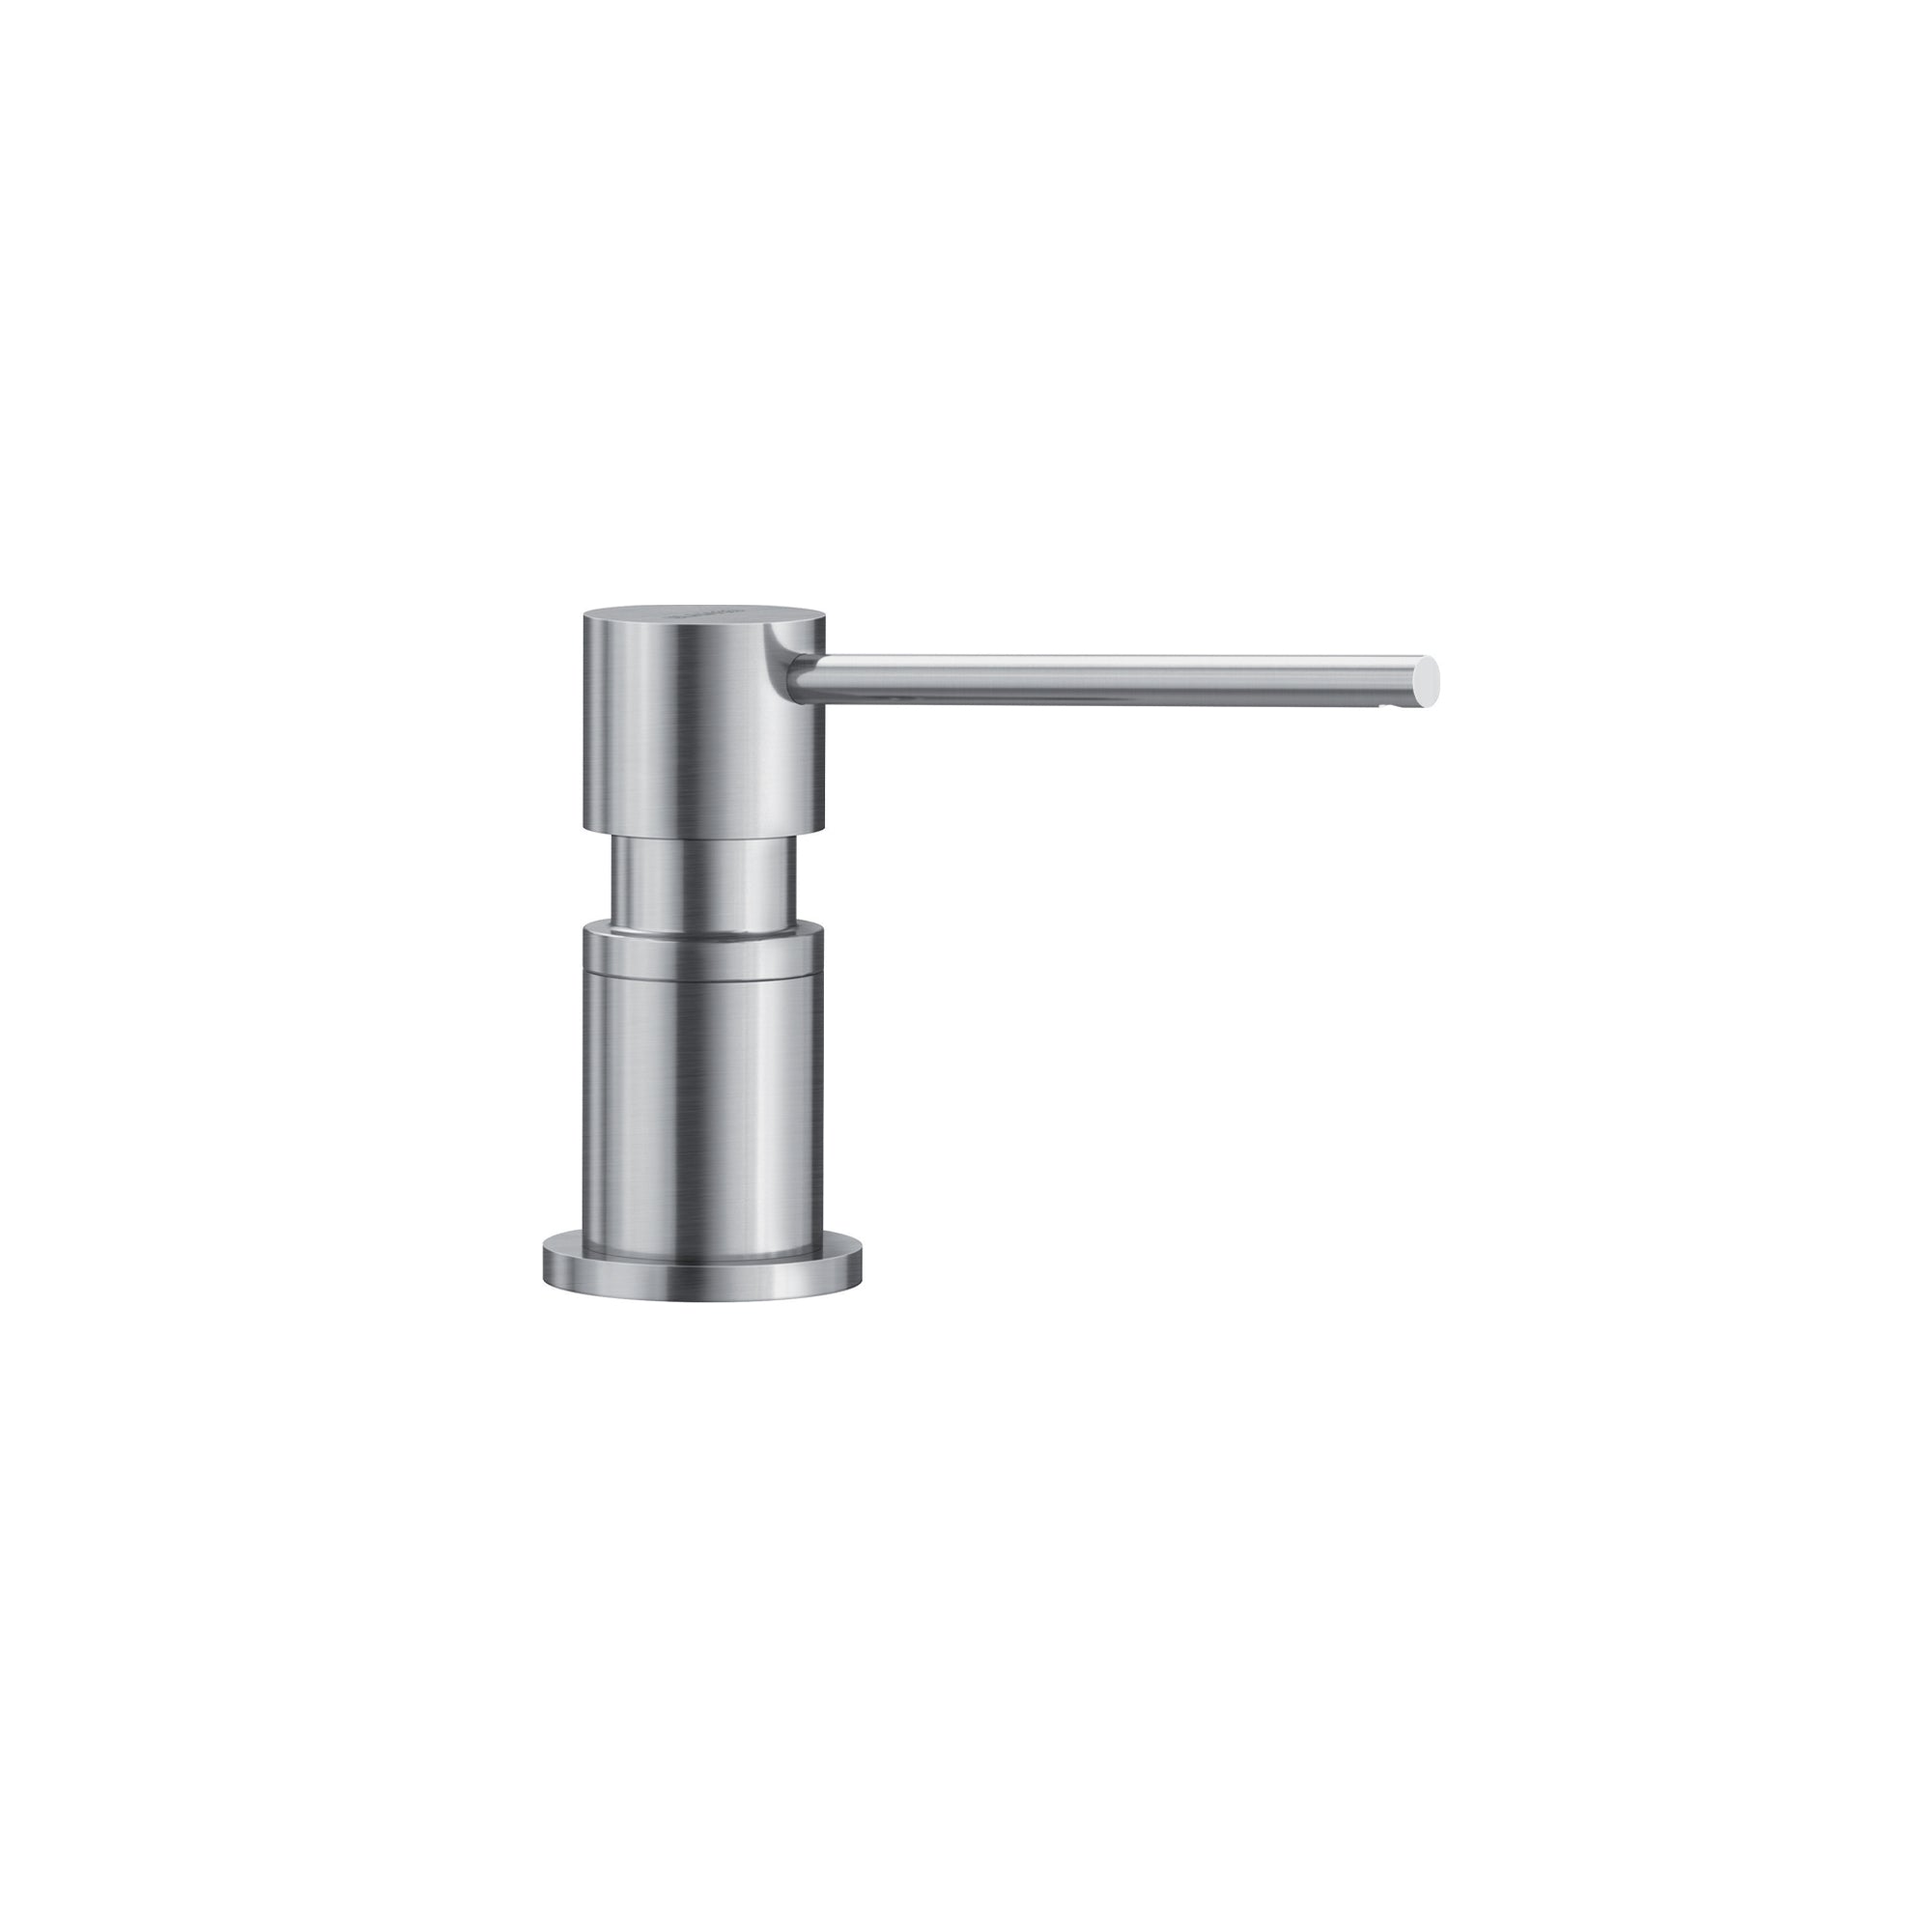 Blanco 402299- LATO soap dispenser, Stainless steel - FaucetExpress.ca